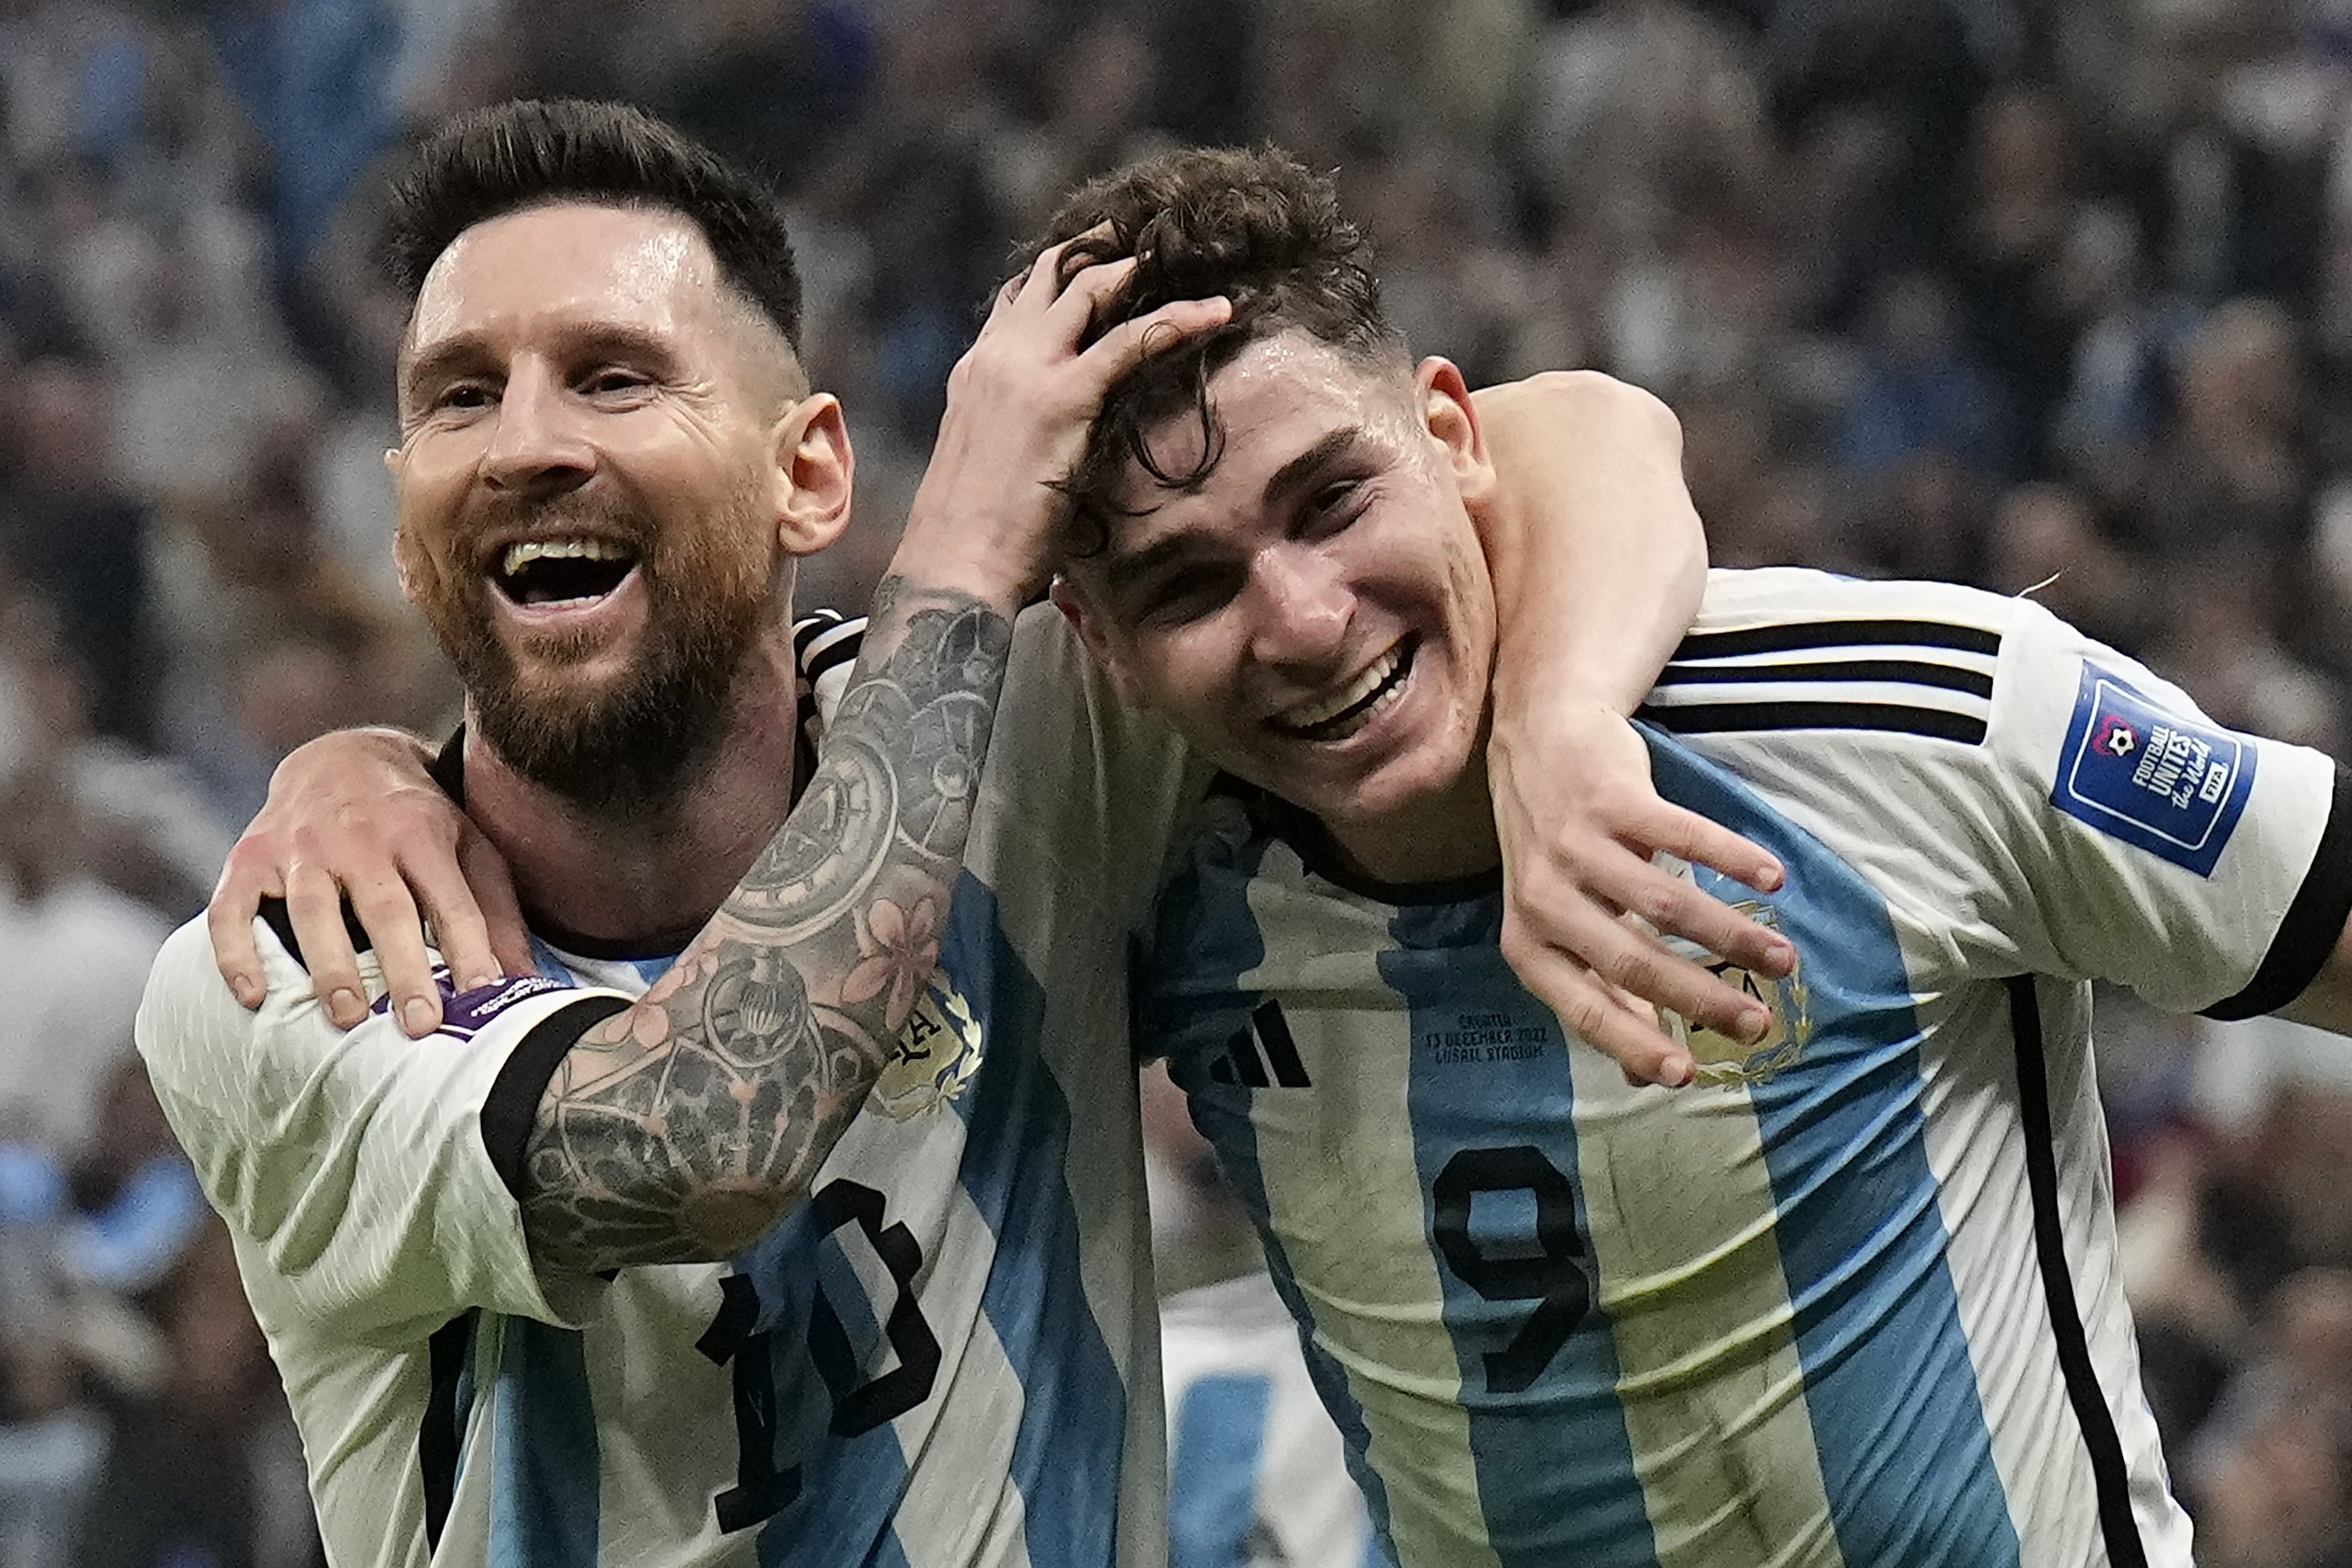 World Cup Final FREE LIVE STREAM (12/18/22) Watch Argentina vs